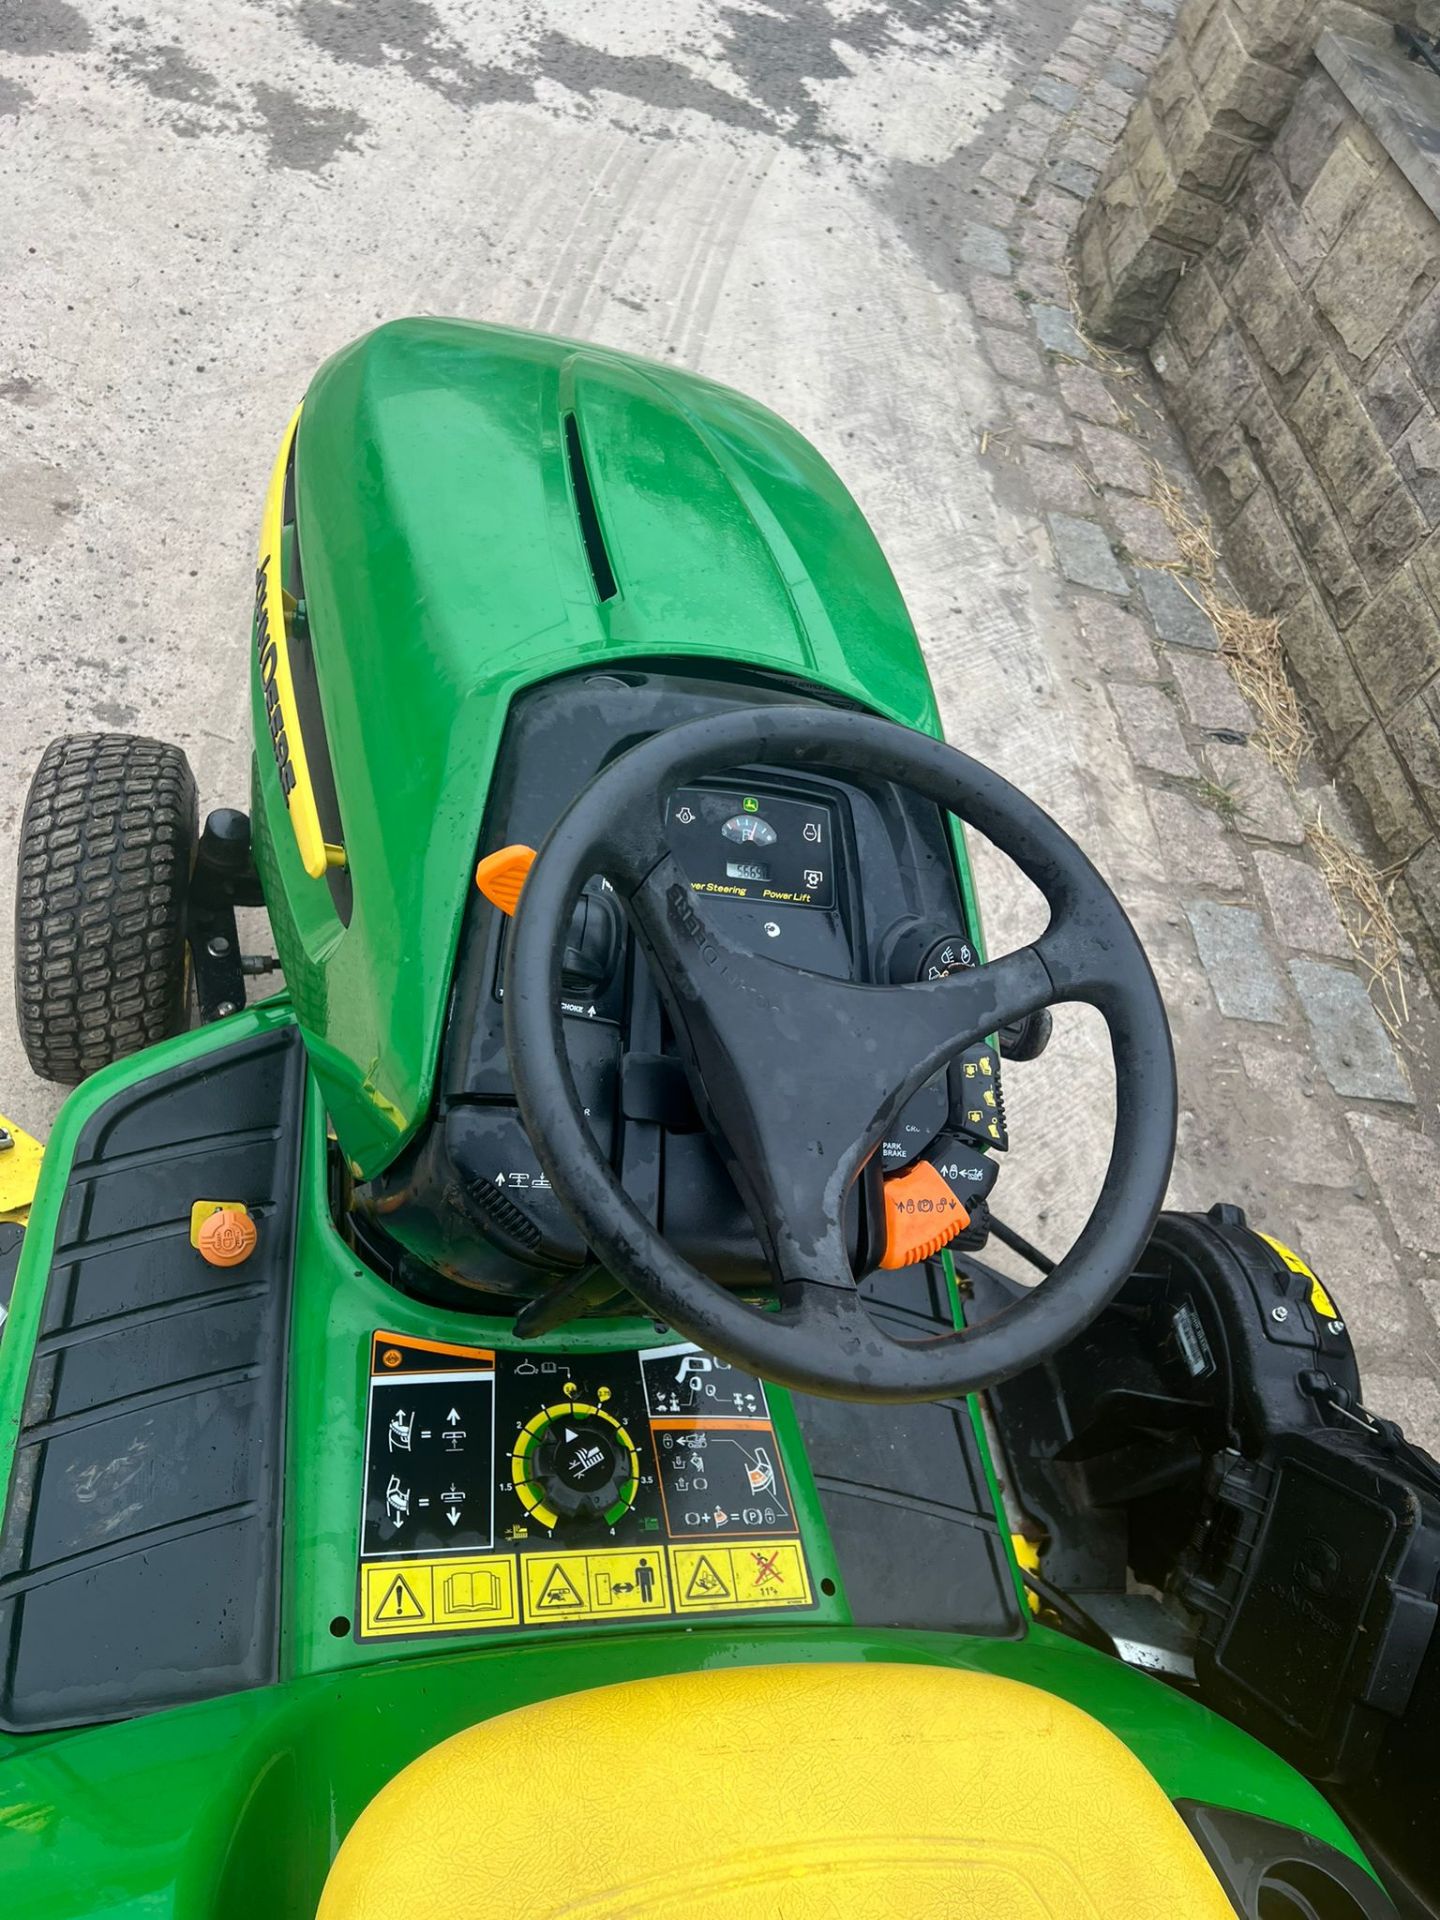 JOHN DEERE X540 RIDE ON LAWN MOWER, HYDRAULIC UP AND DOWN DECK, YEAR 2012 *PLUS VAT* - Image 8 of 9